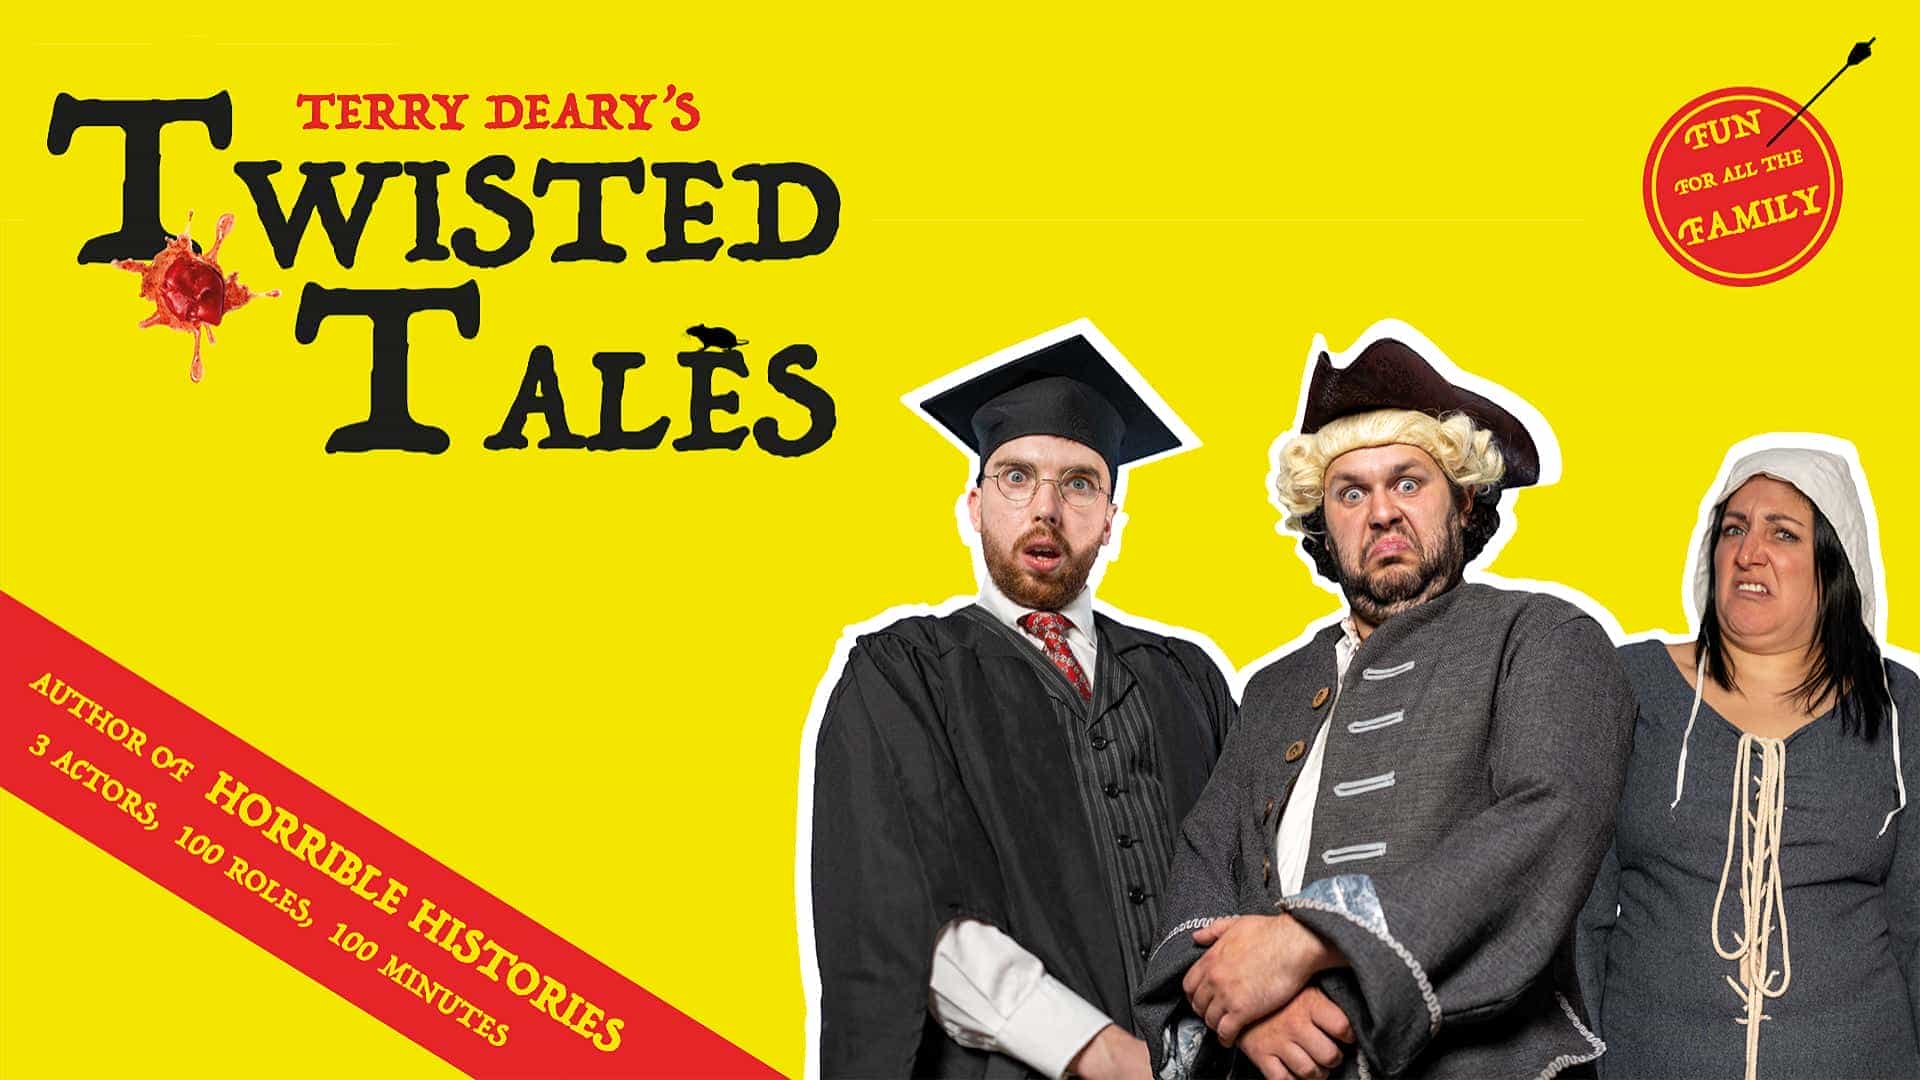 Terry Deary's Twisted Tales